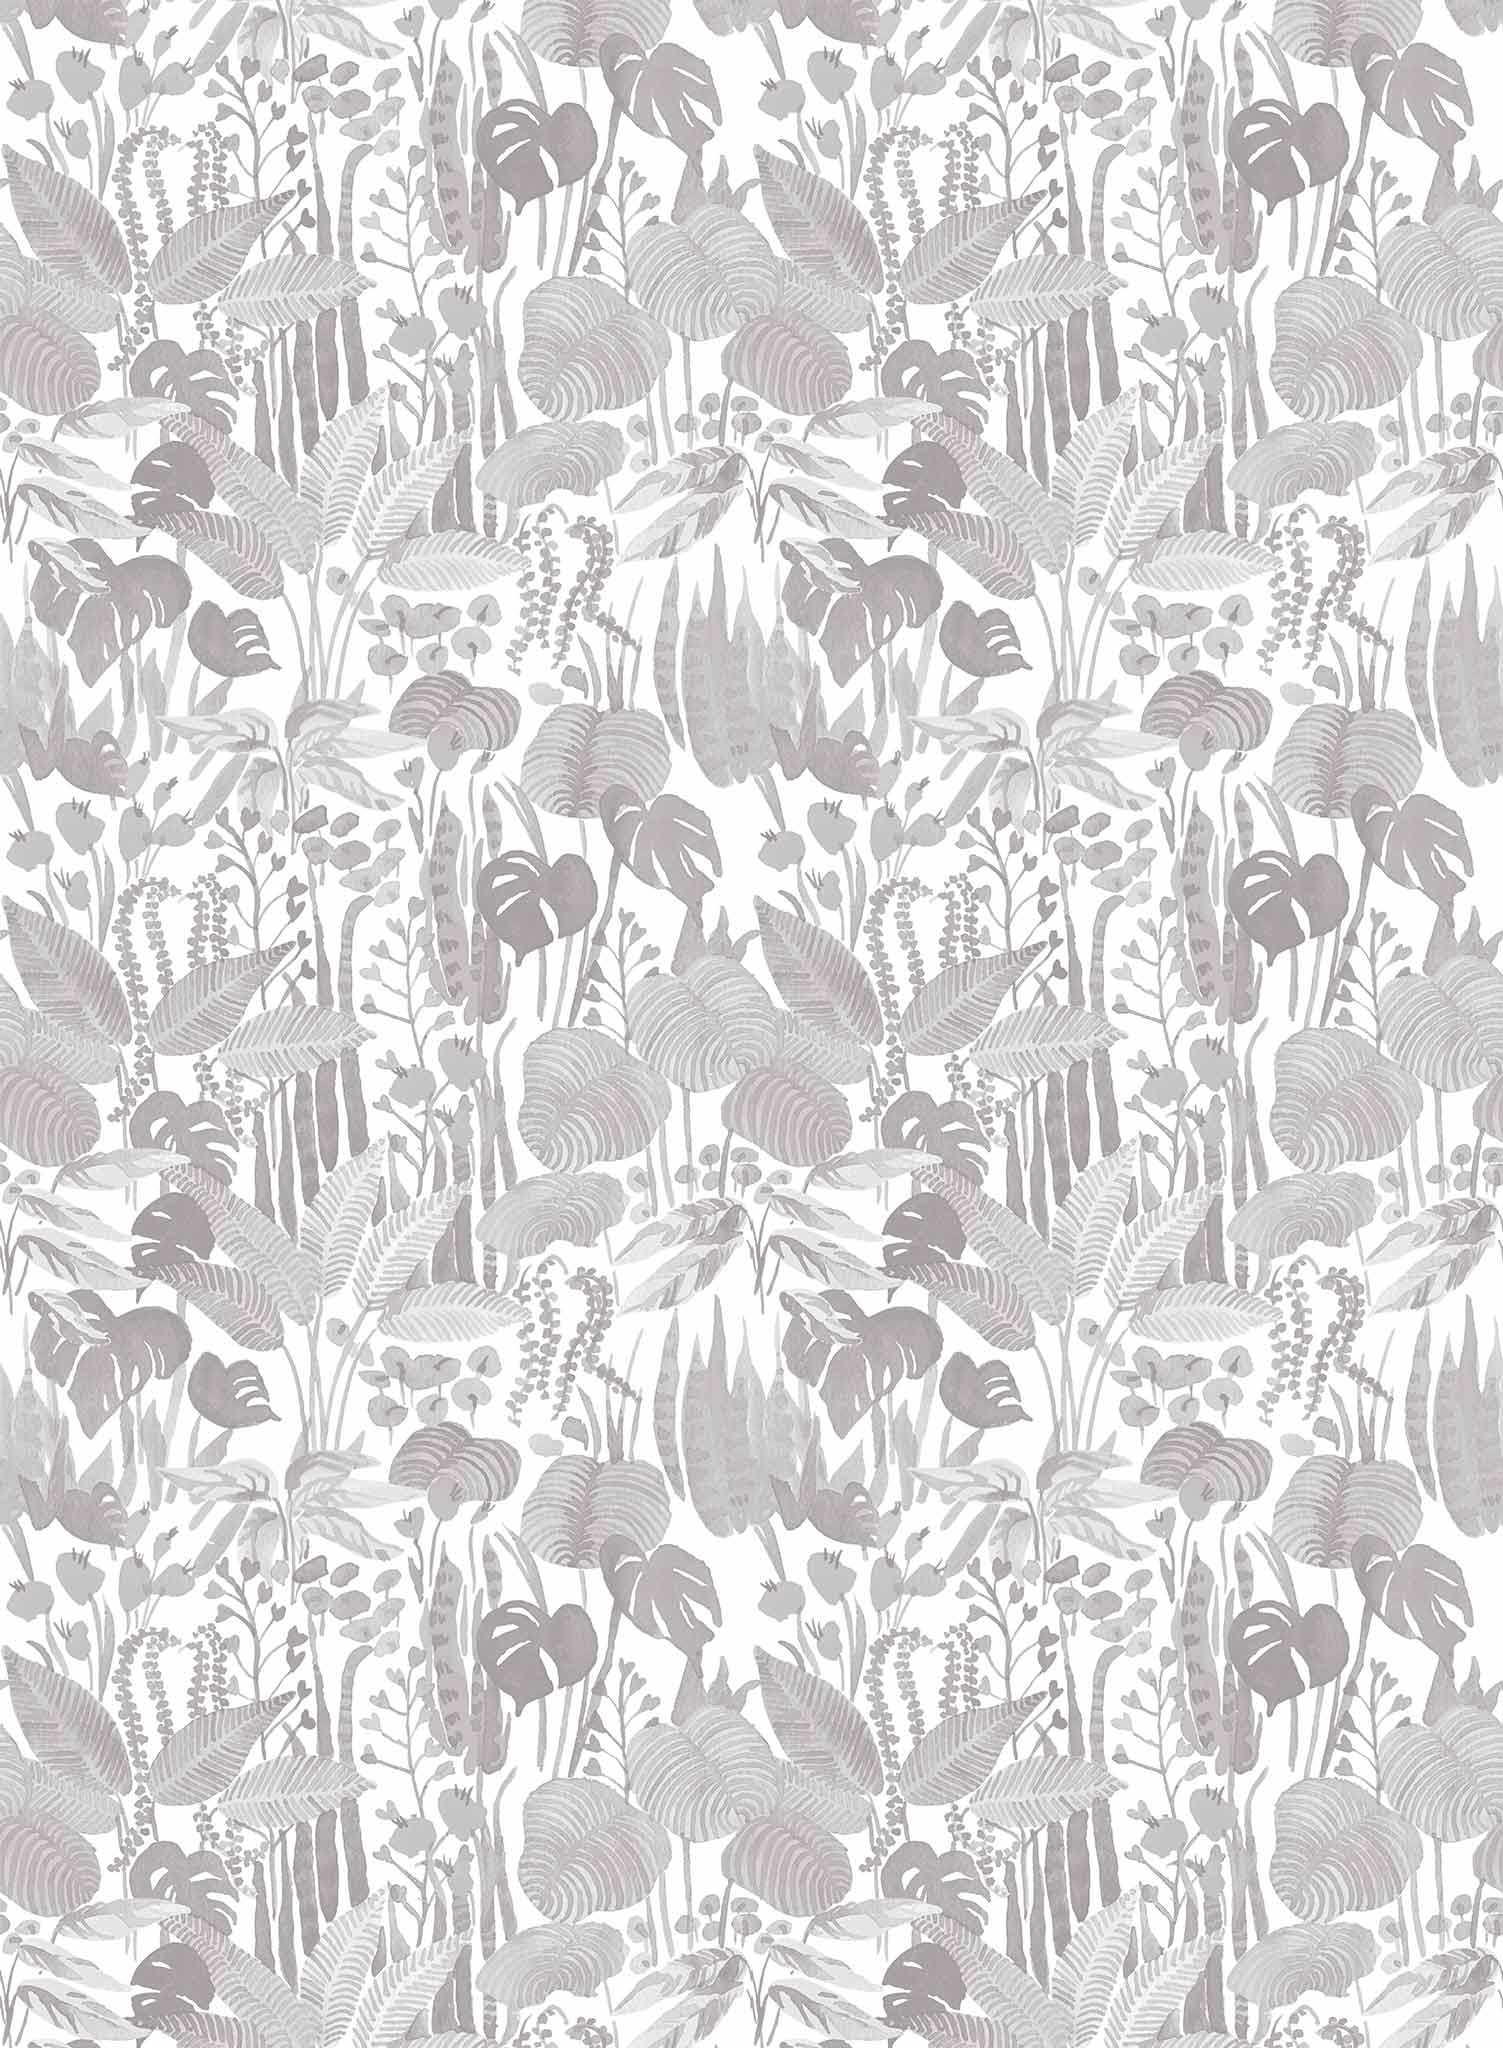 Tropicalia is a minimalist wallpaper by Opposite Wall of a variety of tropical plant leaves.